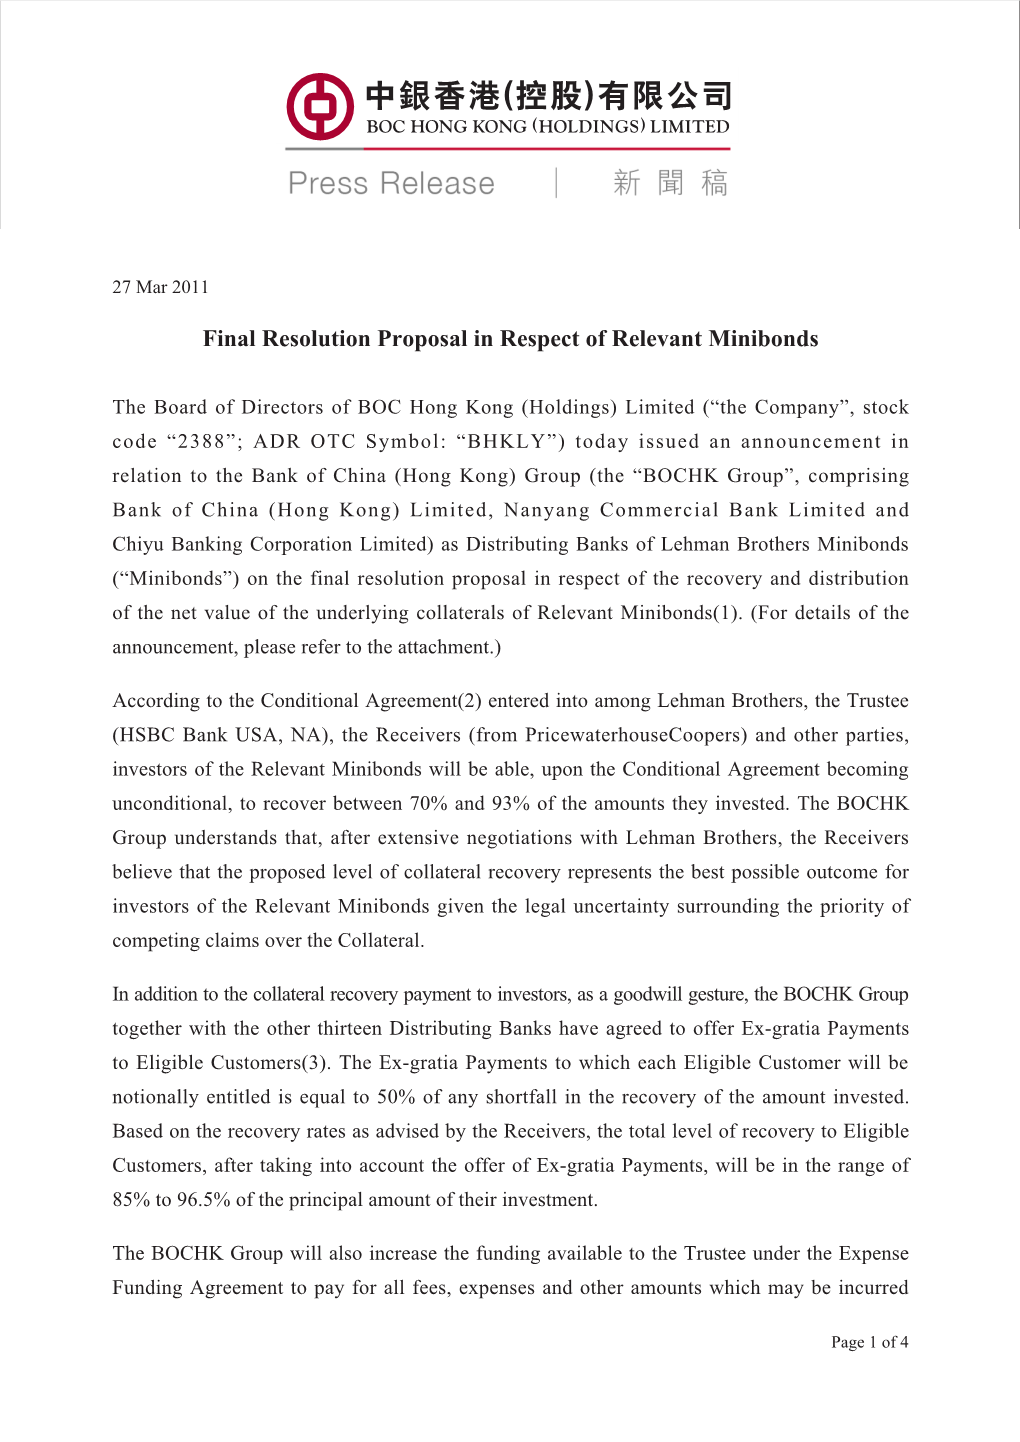 Final Resolution Proposal in Respect of Relevant Minibonds